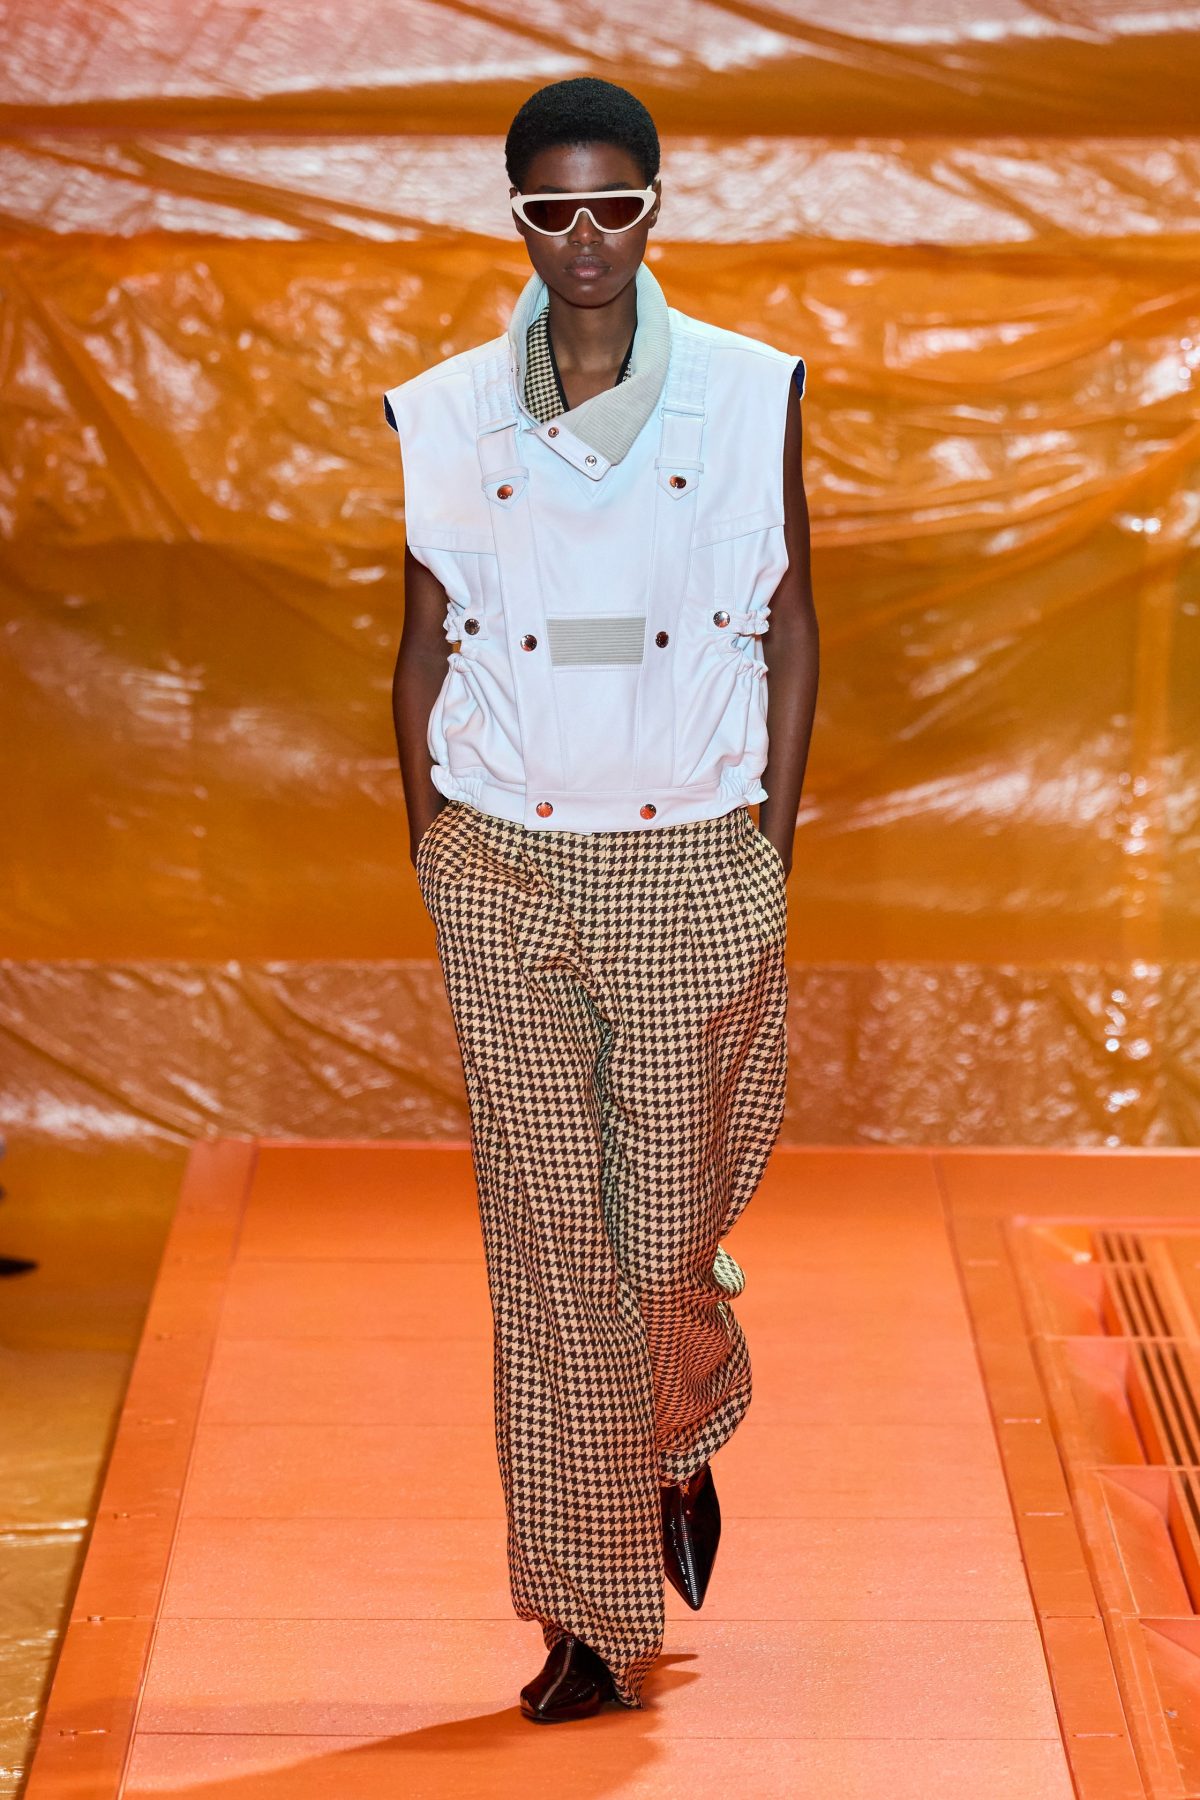 How to Watch Louis Vuitton's Spring/Summer 2021 Runway Show